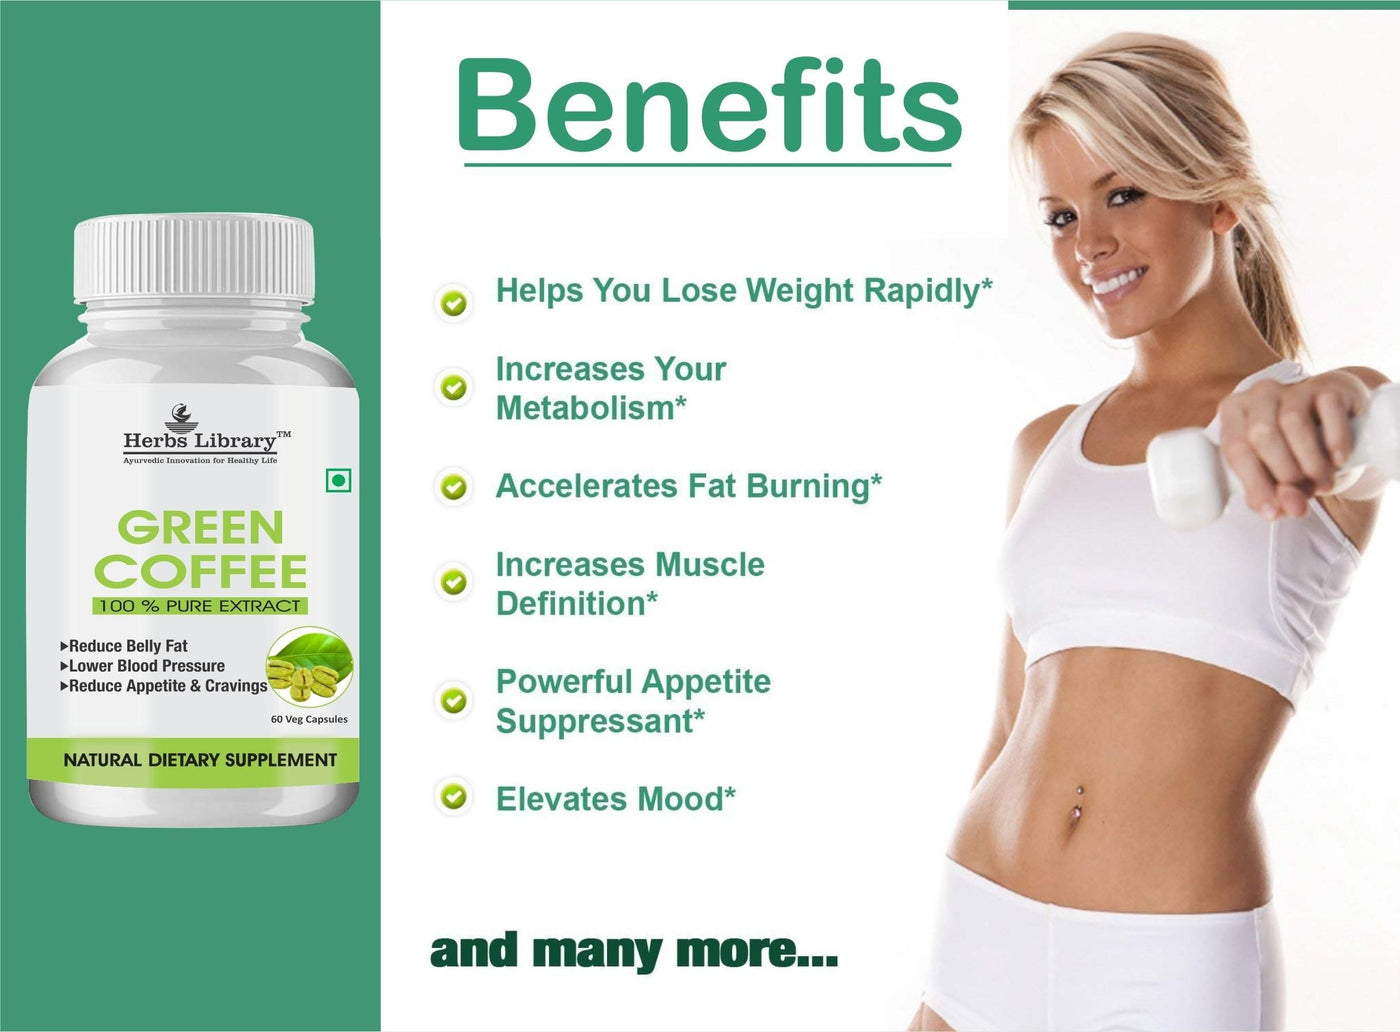 Green Coffee Bean Extract 800mg for Weight Loss - 60 Capsules